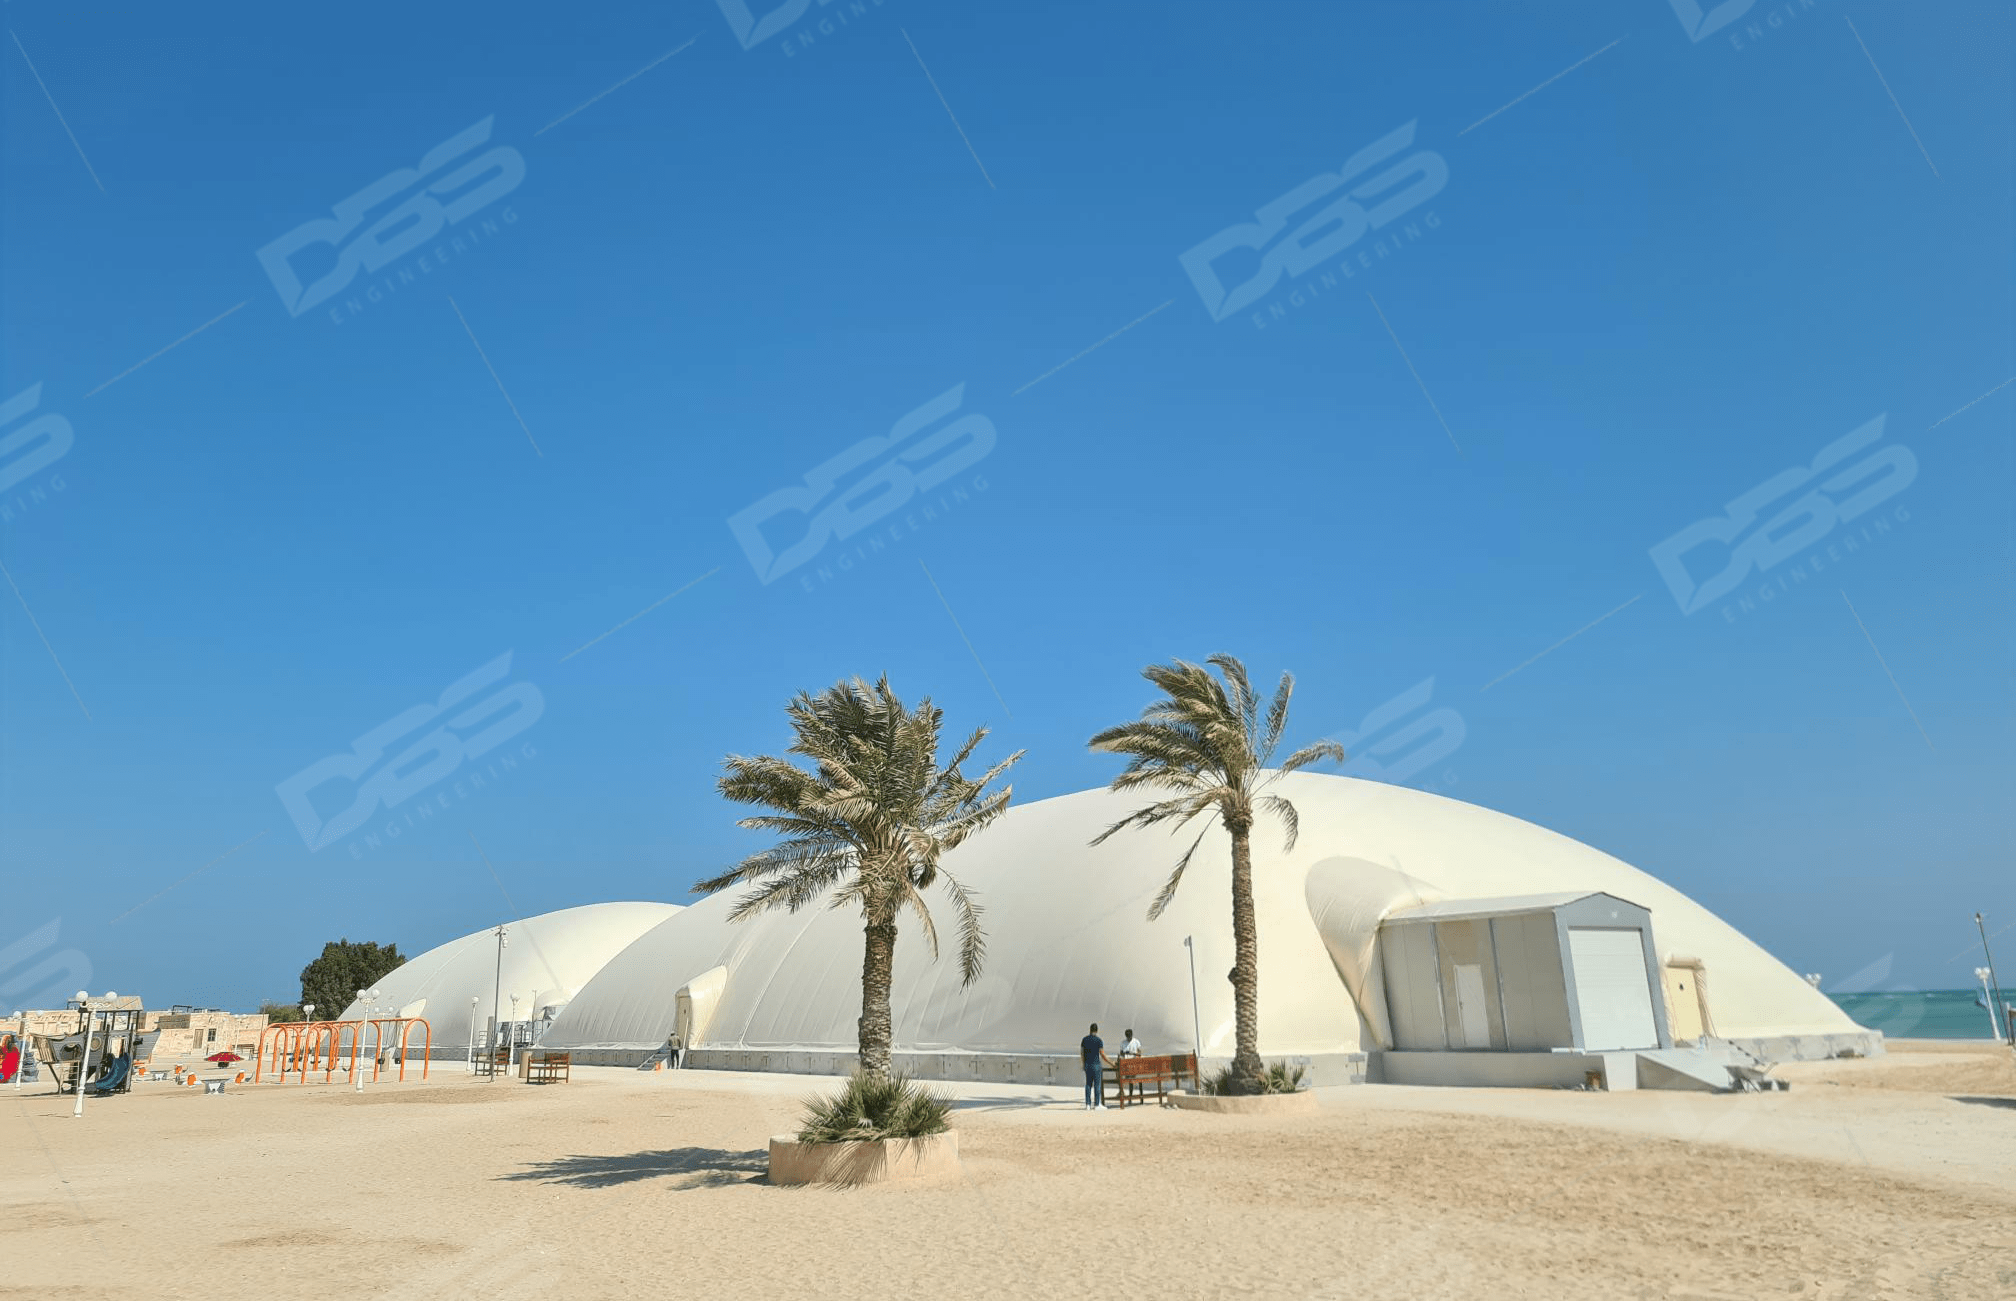 ComfortClick QATAR TWIN DOME - for the FIFA 2022 World Cup